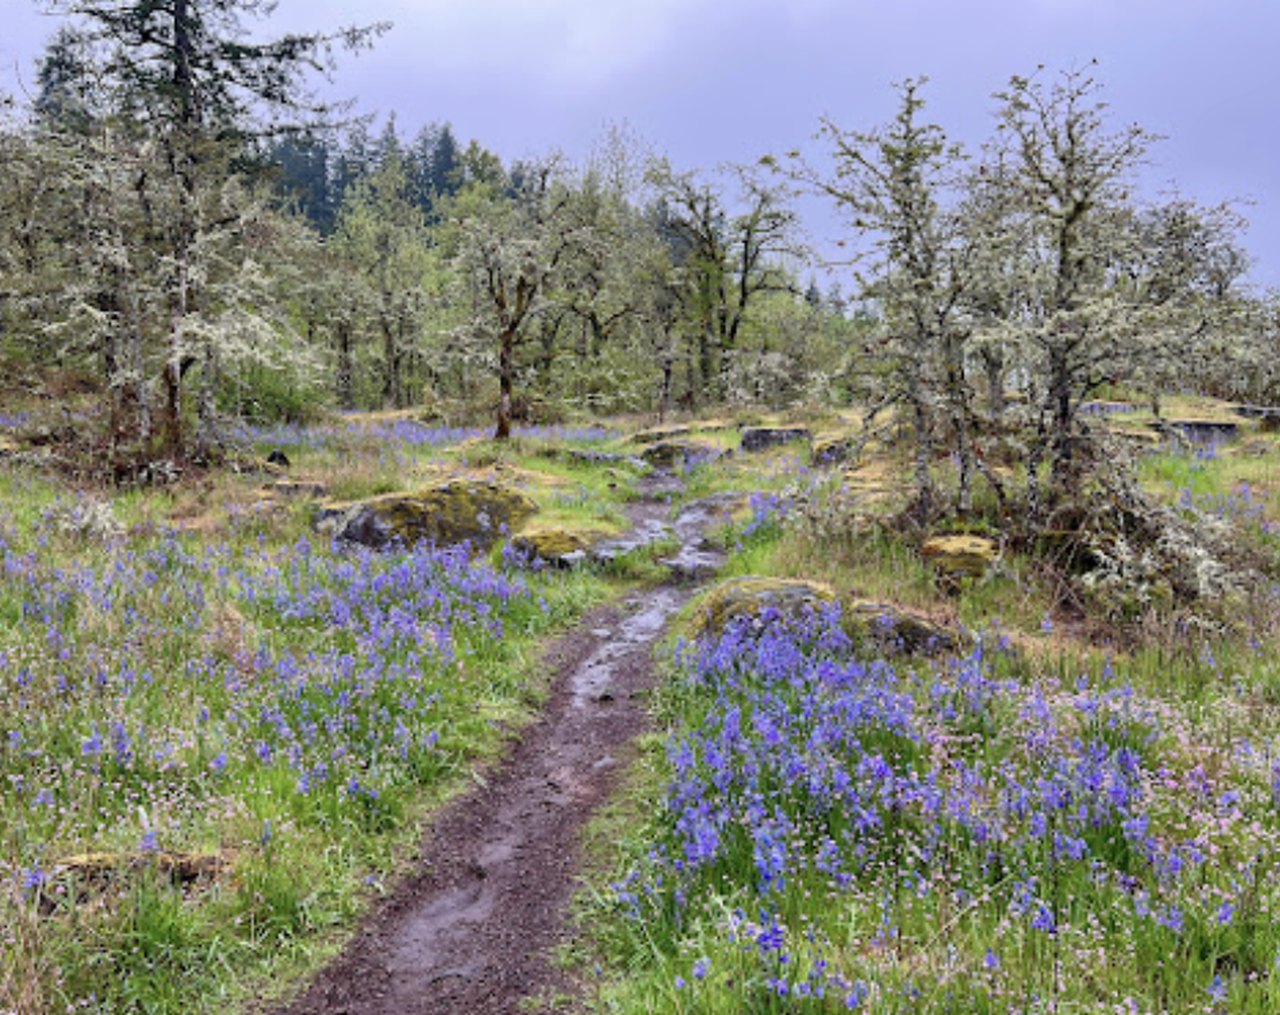 This Oregon Park Is One Of The Best Places To View Summer Wildflowers ...